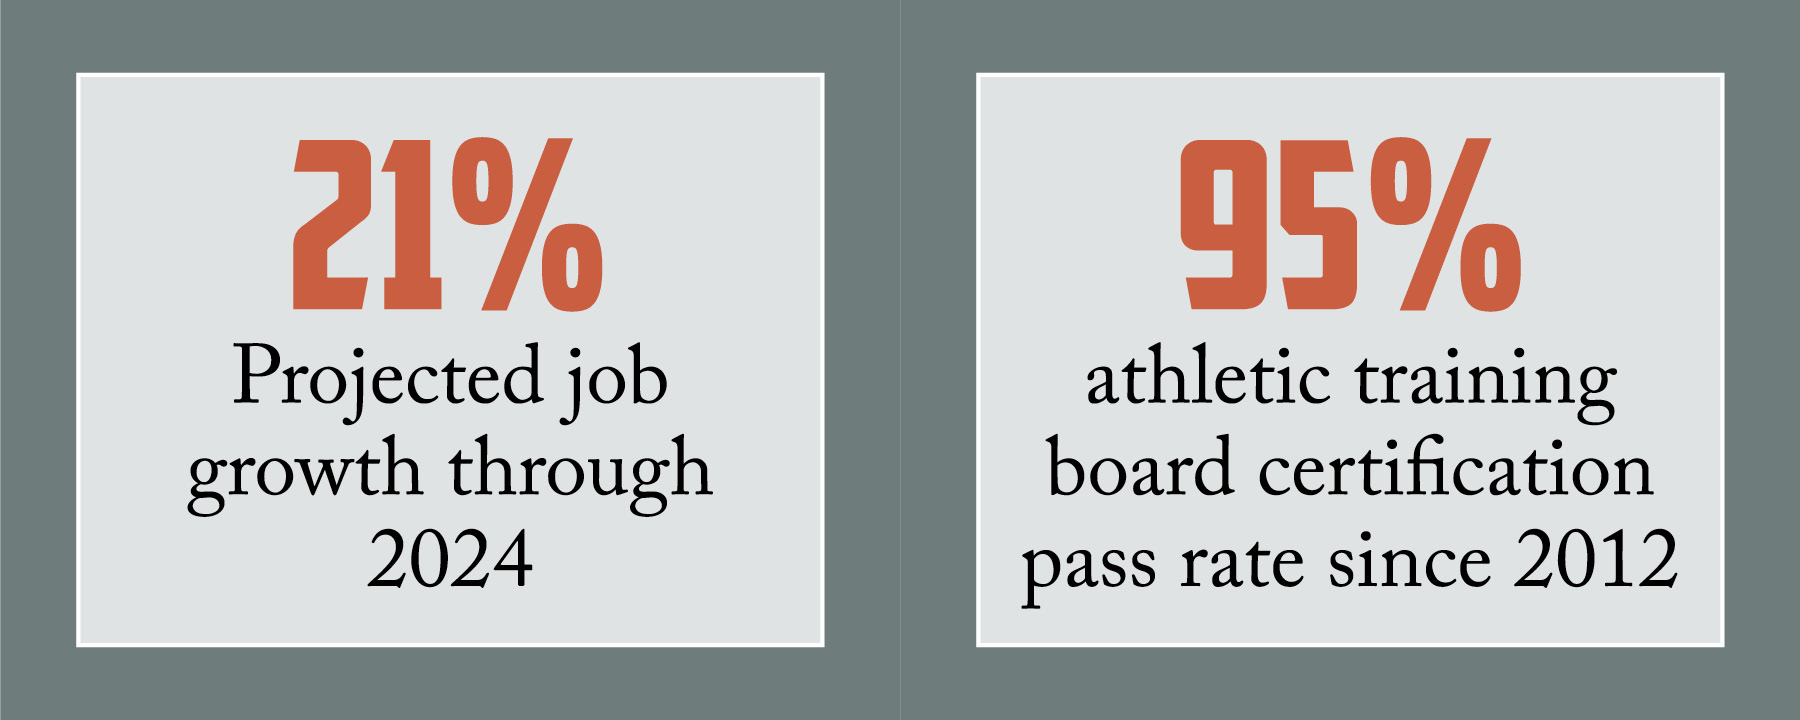 21% projected job growth through 2024; 95% athletic training board certification pass rate since 2012